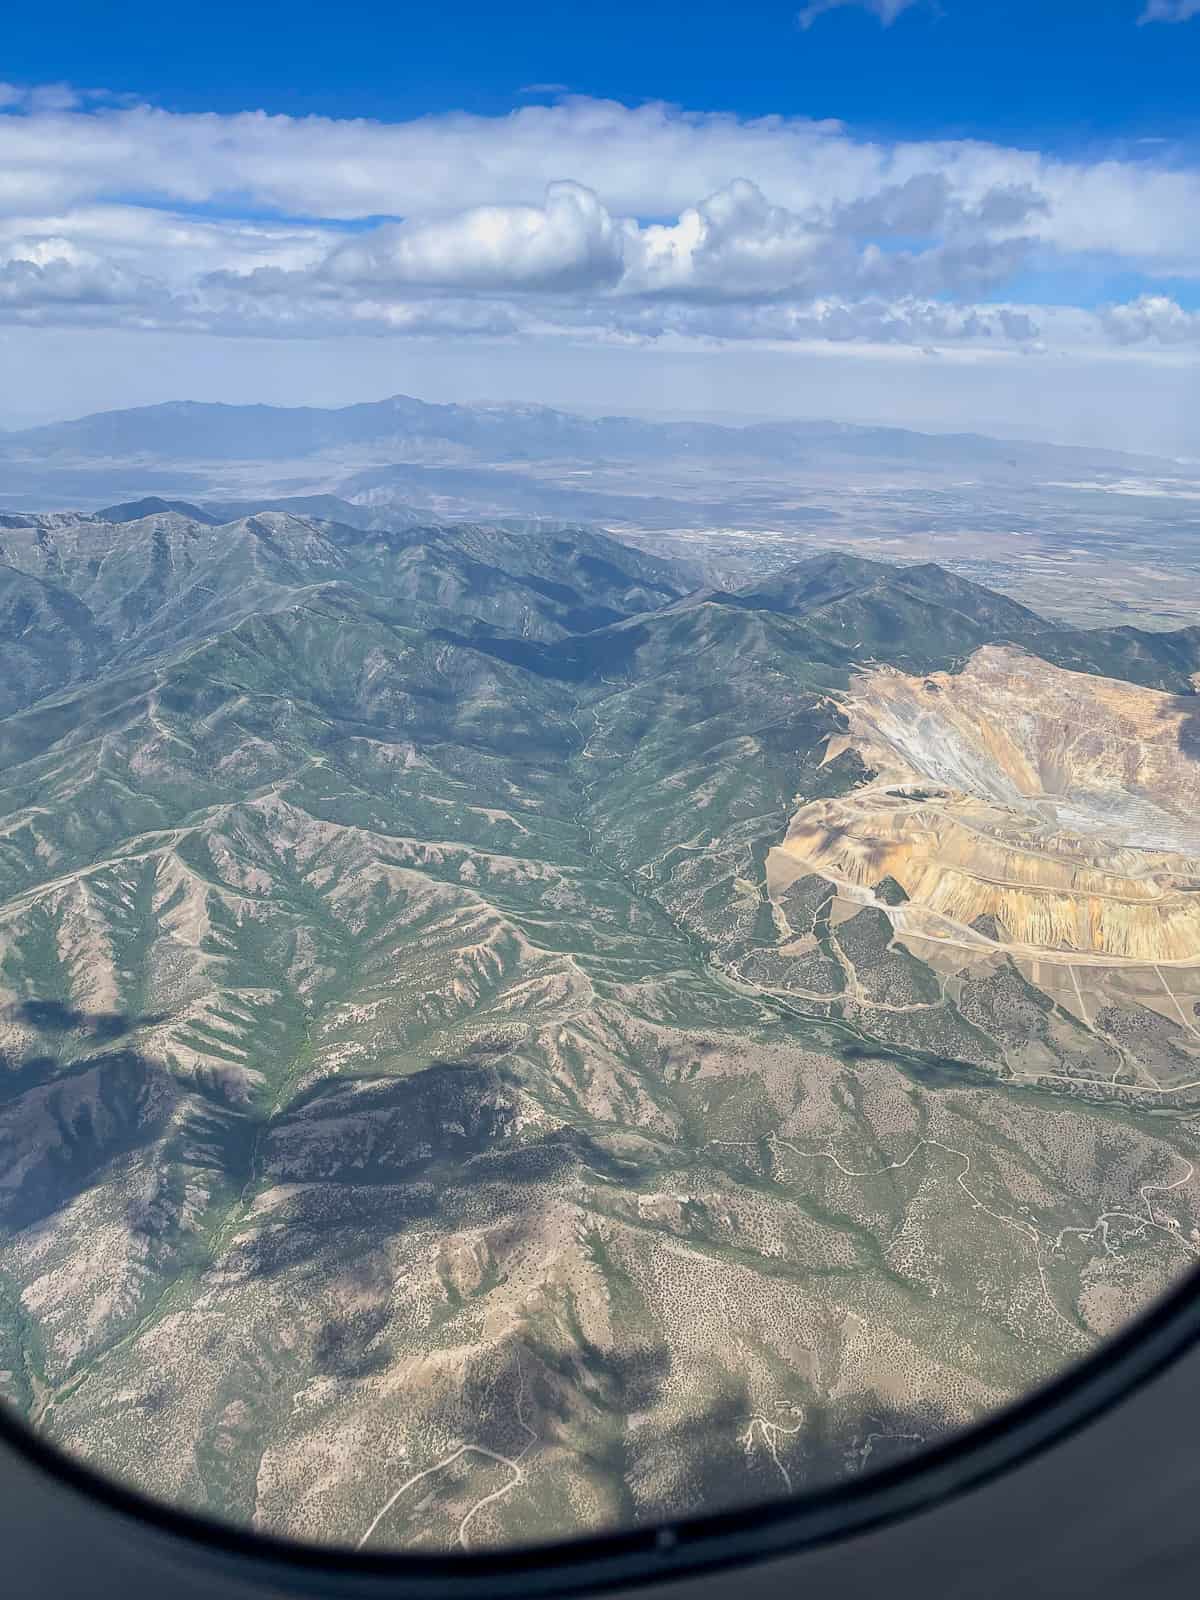 The view out our airplane window coming into SLC.